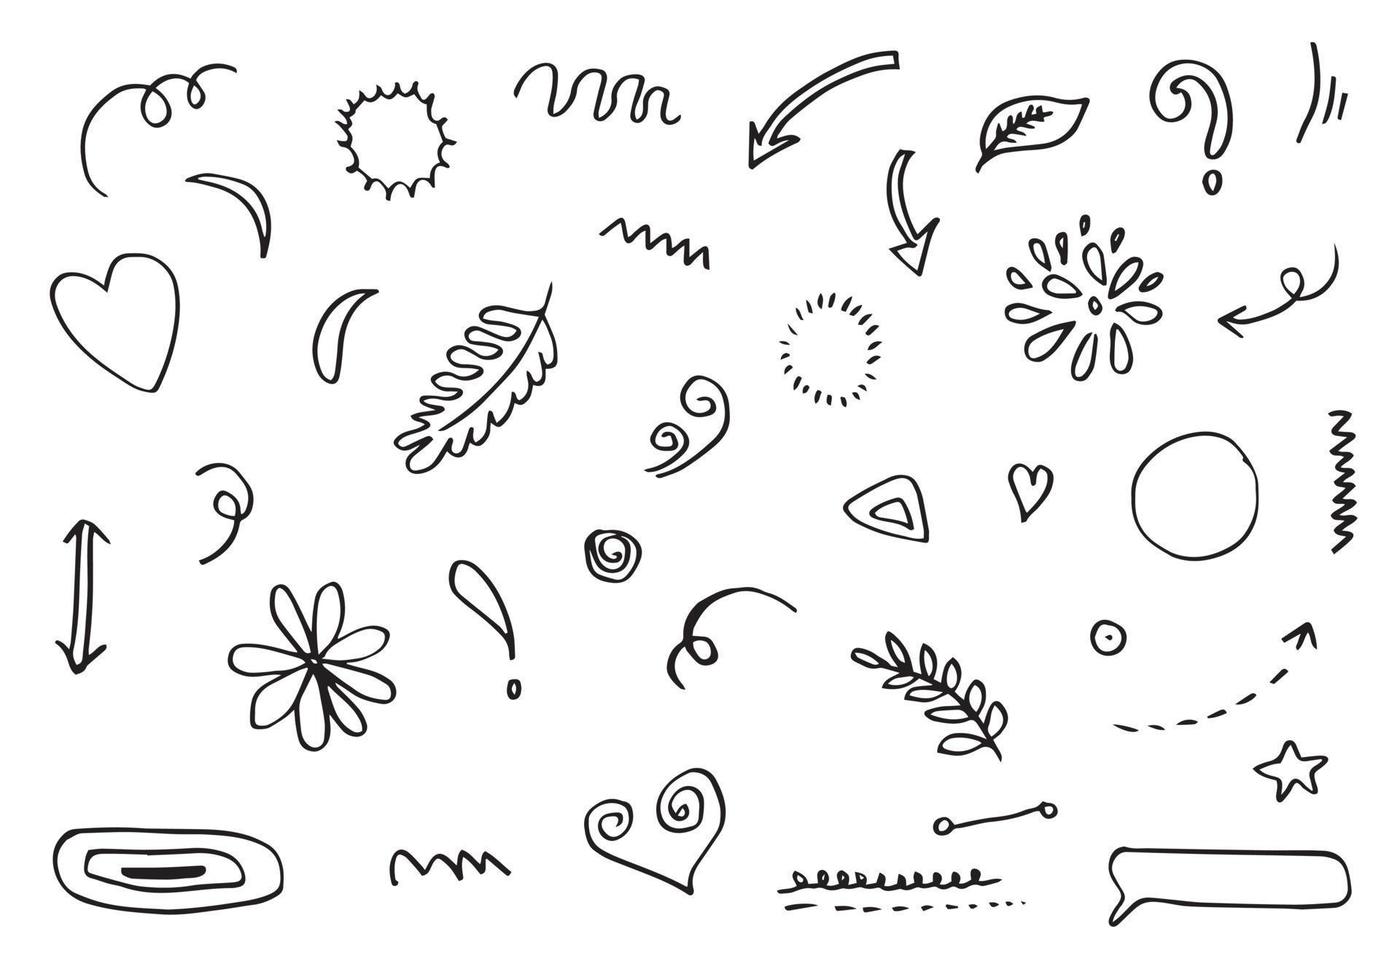 Hand drawn set elements, black on white background. Arrow, heart, love, star, leaf, sun, light, flower, crown, king, queen,Swishes, swoops, emphasis ,swirl, heart, for concept design. vector